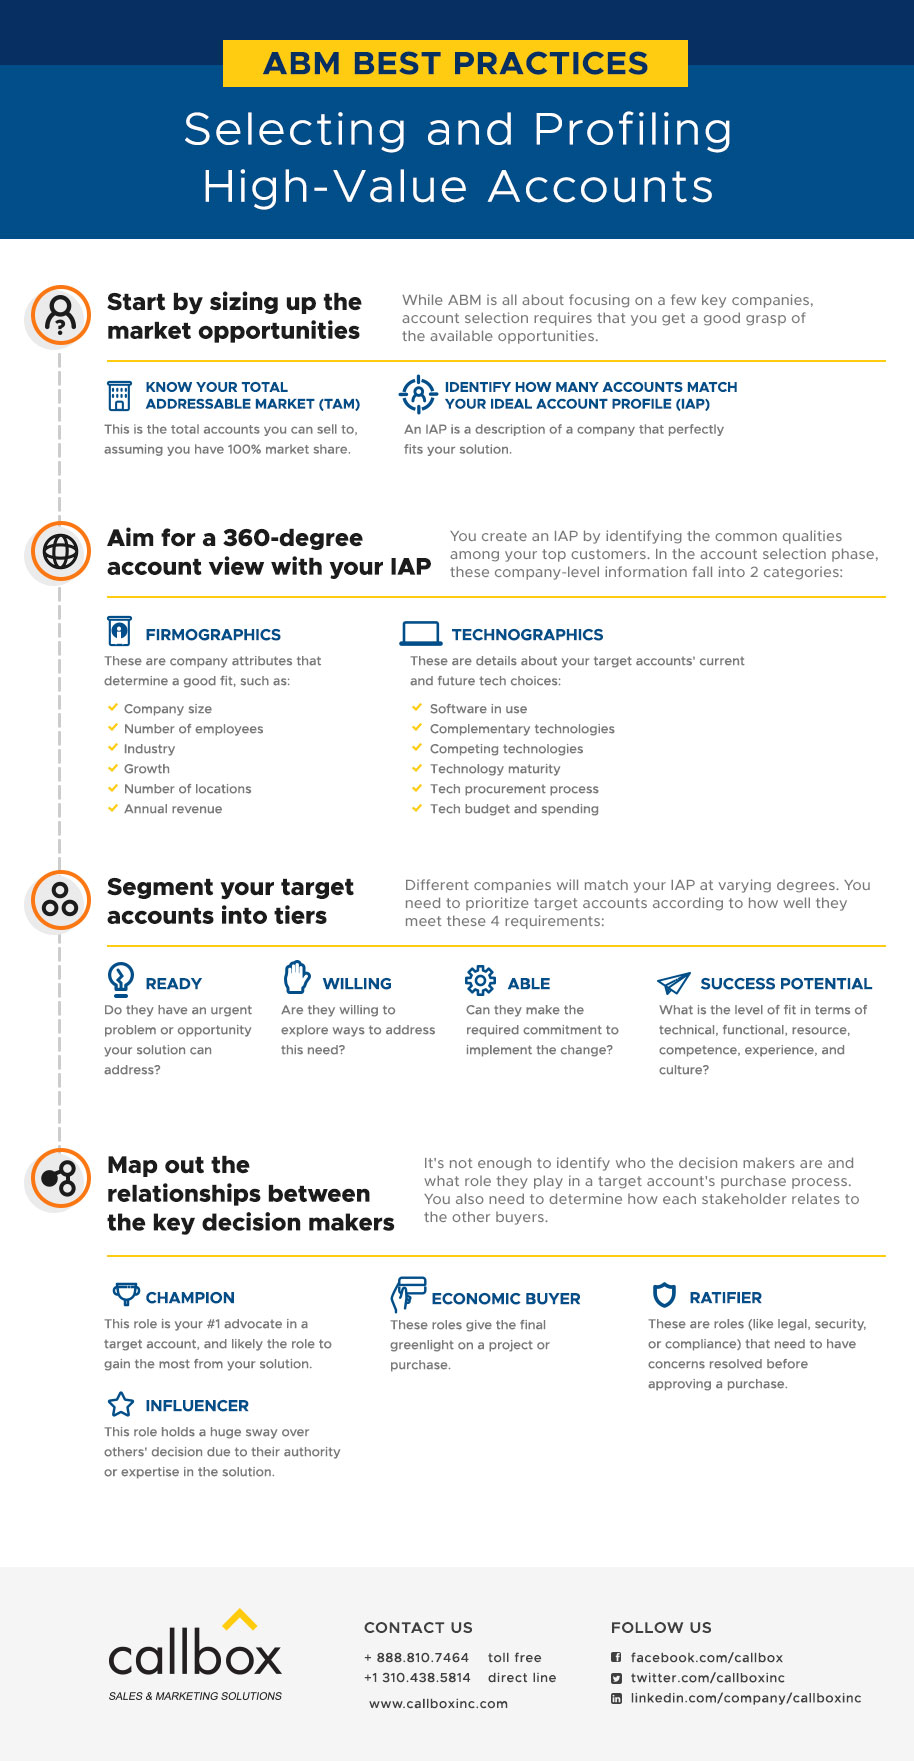 ABM Best Practices: Selecting and Profiling High-Value Accounts [INFOGRAPHIC]